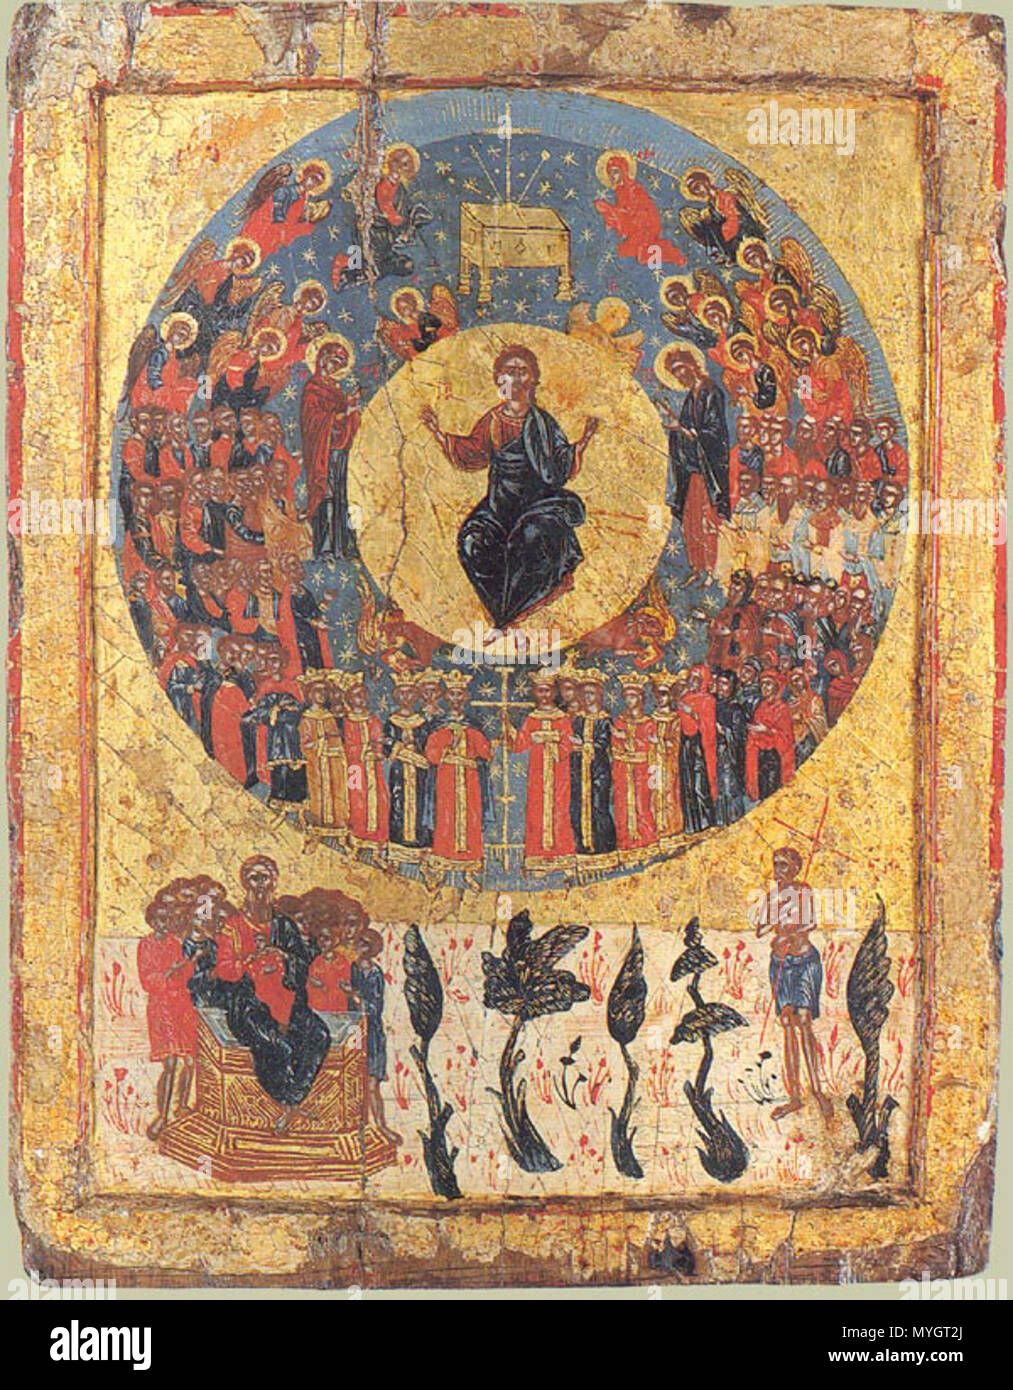 . Icon of Second Coming (also used for All Saints Sunday). Christ is enthroned in the center surrounded by the angels and saints, Paradise is at the bottom, with the Bosom of Abraham (left) and the Good Thief (right) holding his cross. Greece. Around 1700 Wood, gesso, tempera. Size - 34.5 x 27 cm Private Collection. Bibliography Sotheby's: Icons, Russian Pictures and Works of Art. London, 1991, p 155. Второе пришествие. Греция. Около 1700 г. Дерево, левкас, темпера. Размер - 34,5 х 27 см. Иконография Рай Лоно Авраамово Все святые Христос в Славе Второе пришествие Происхождение Неизвестно. Мест Stock Photo